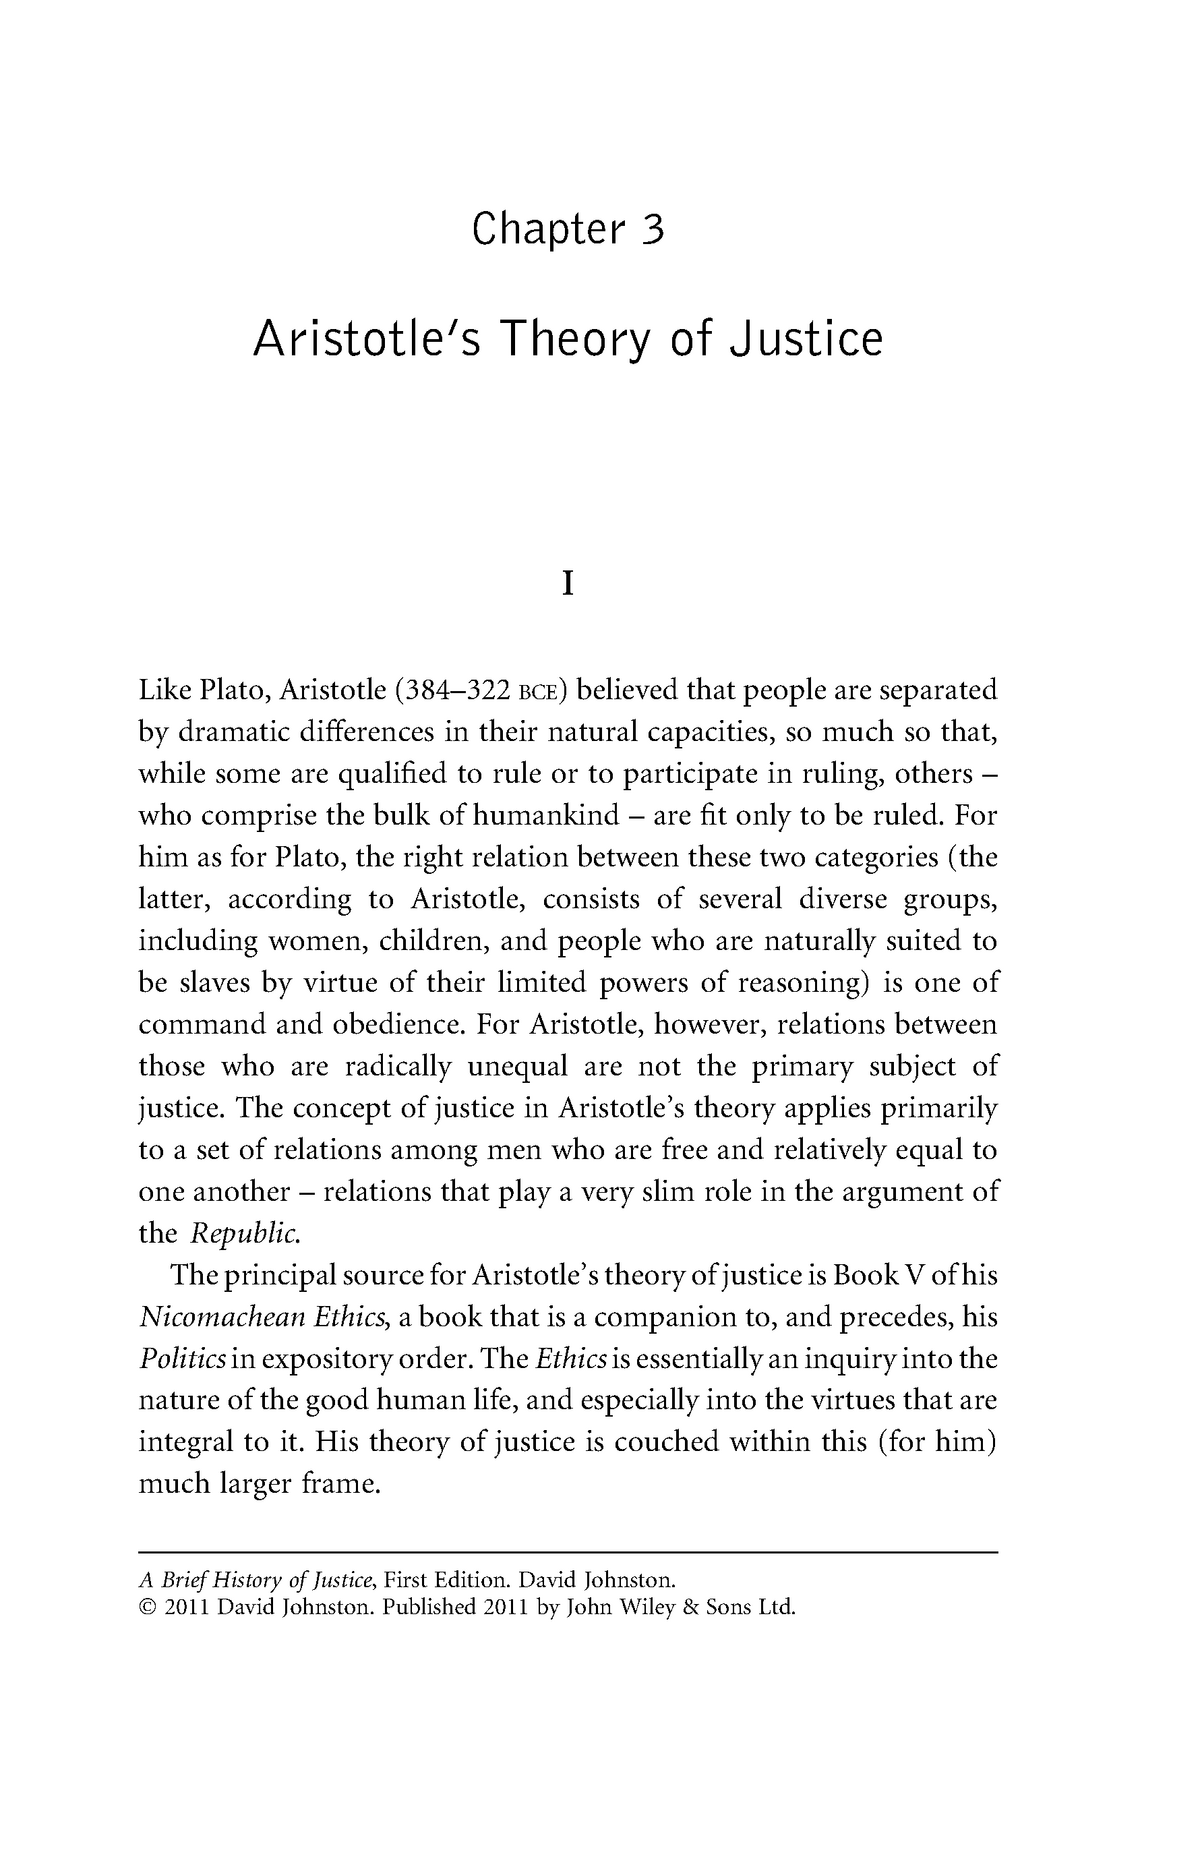 plato theory of justice essay